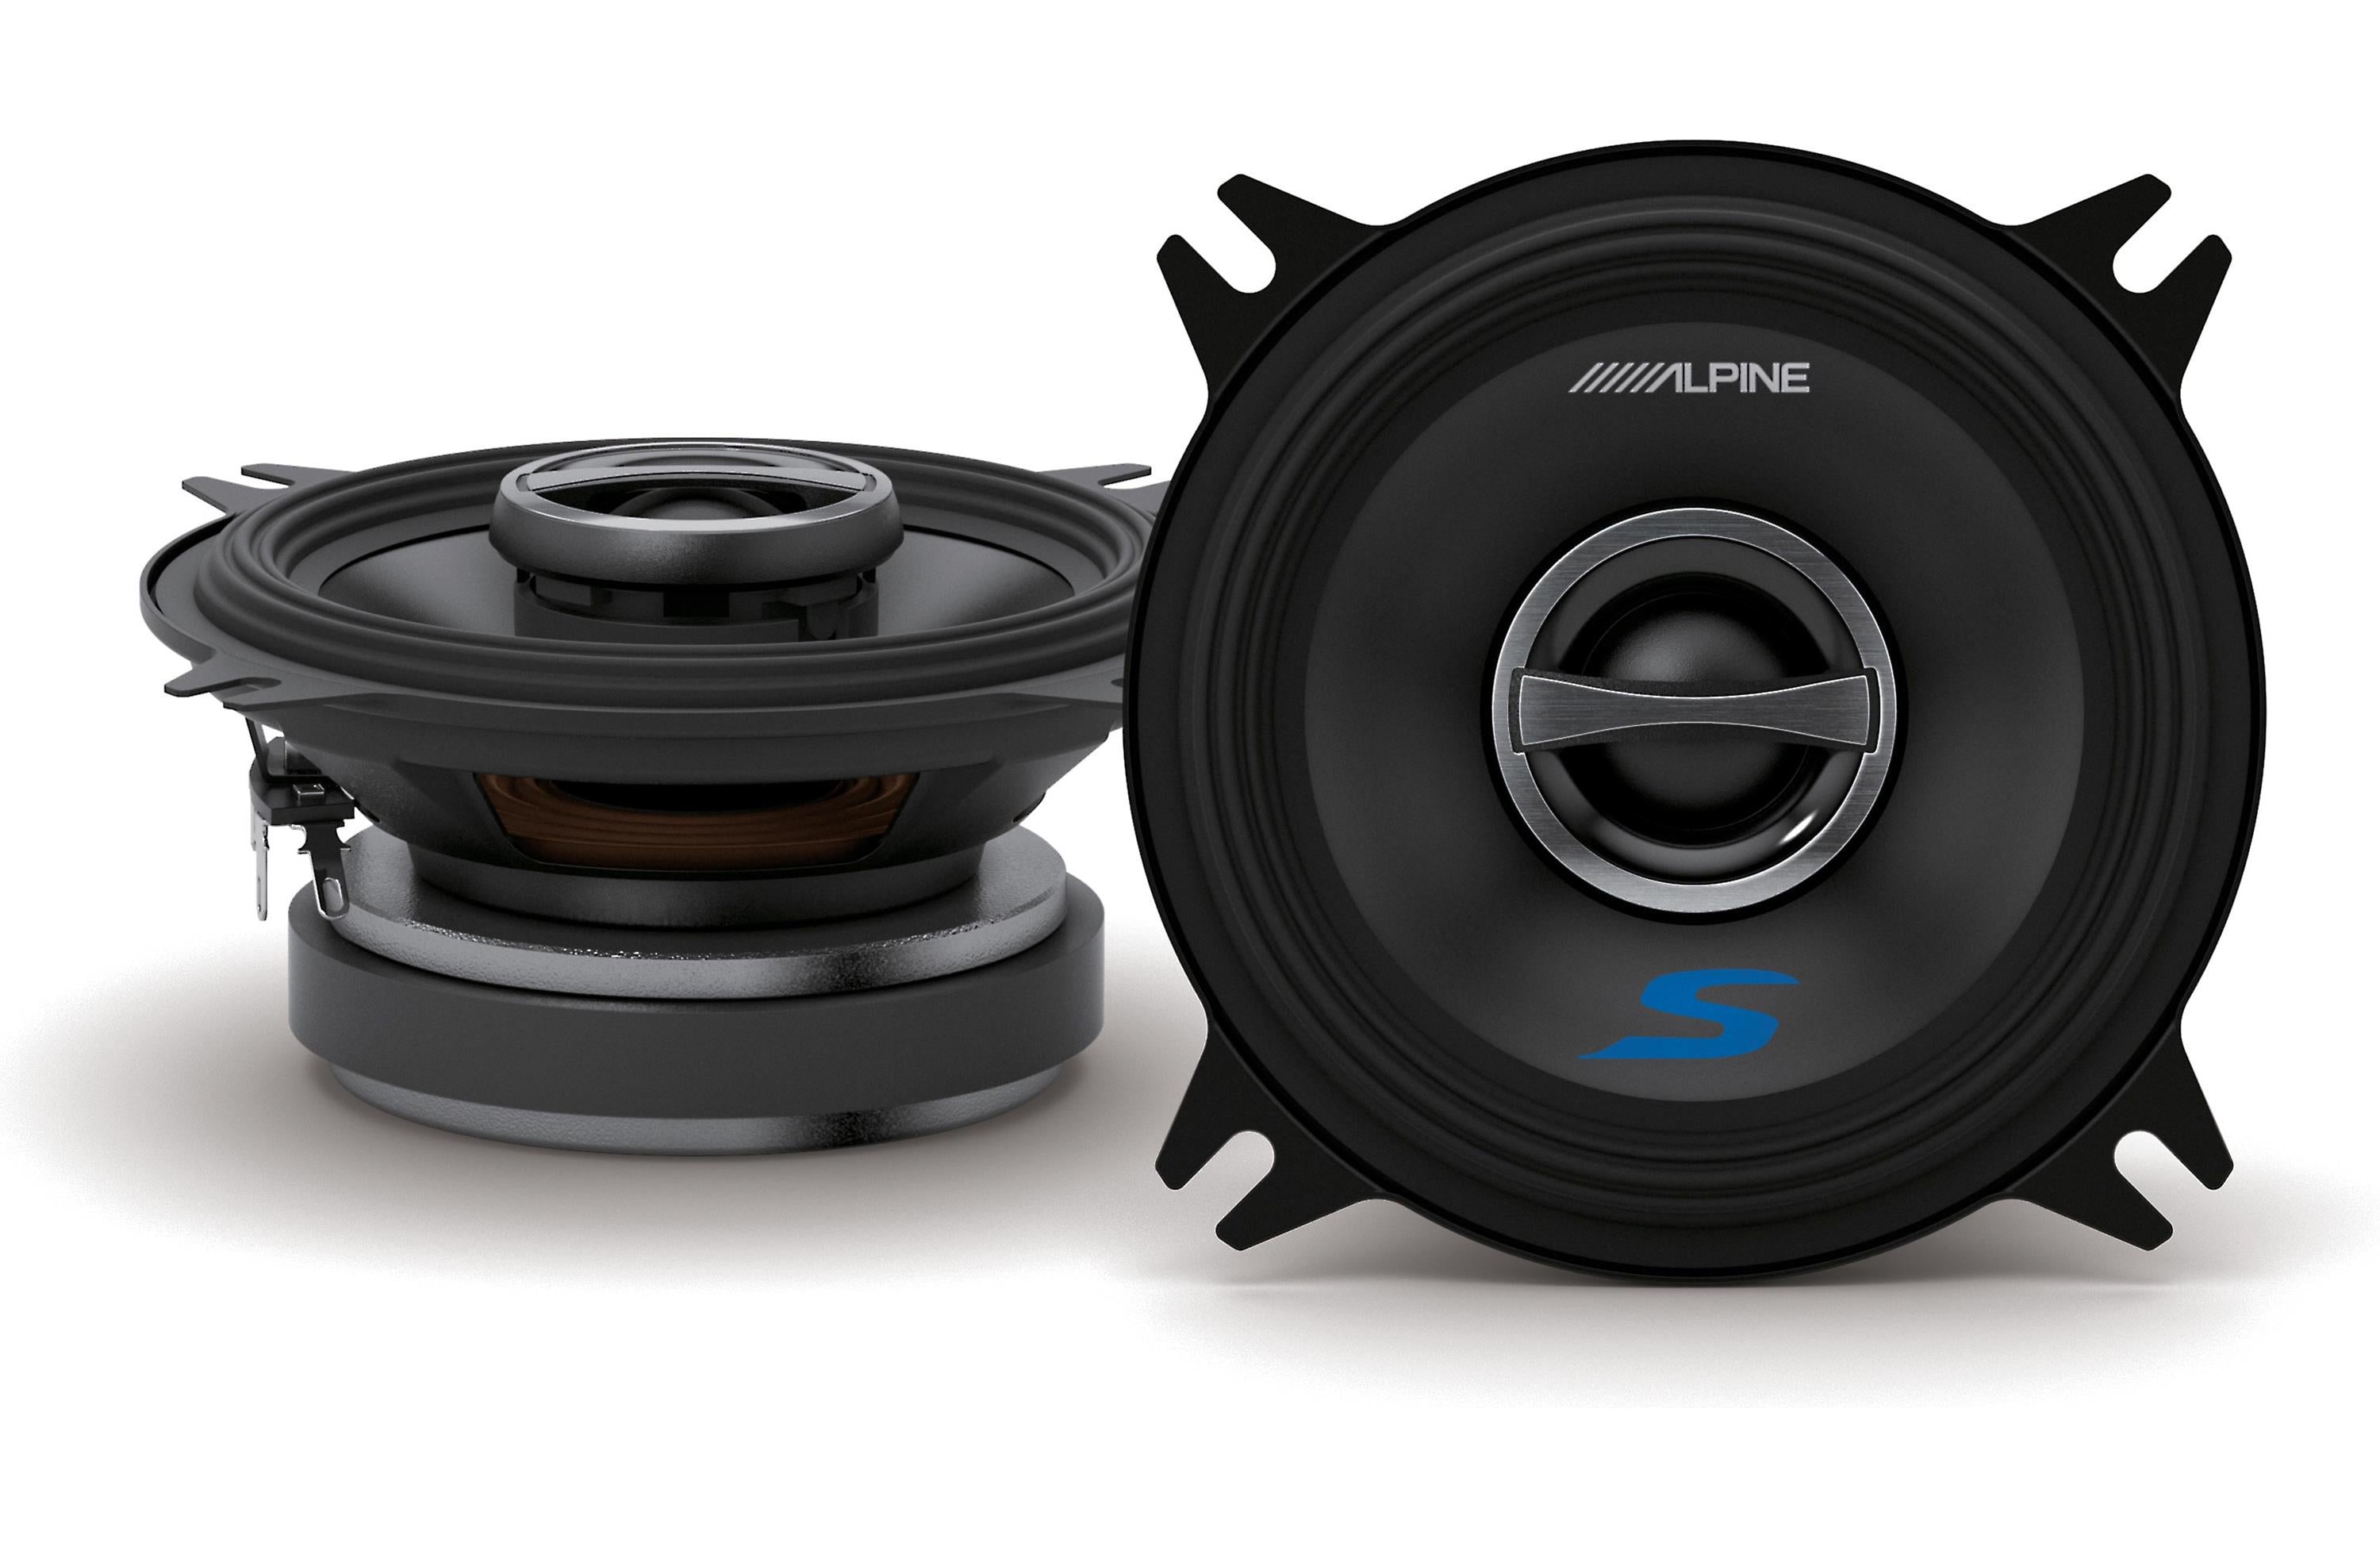 Alpine S-Series S-S69 6"X9" 2-Way Coaxial Speaker and S-S40 4" Coaxial Speaker